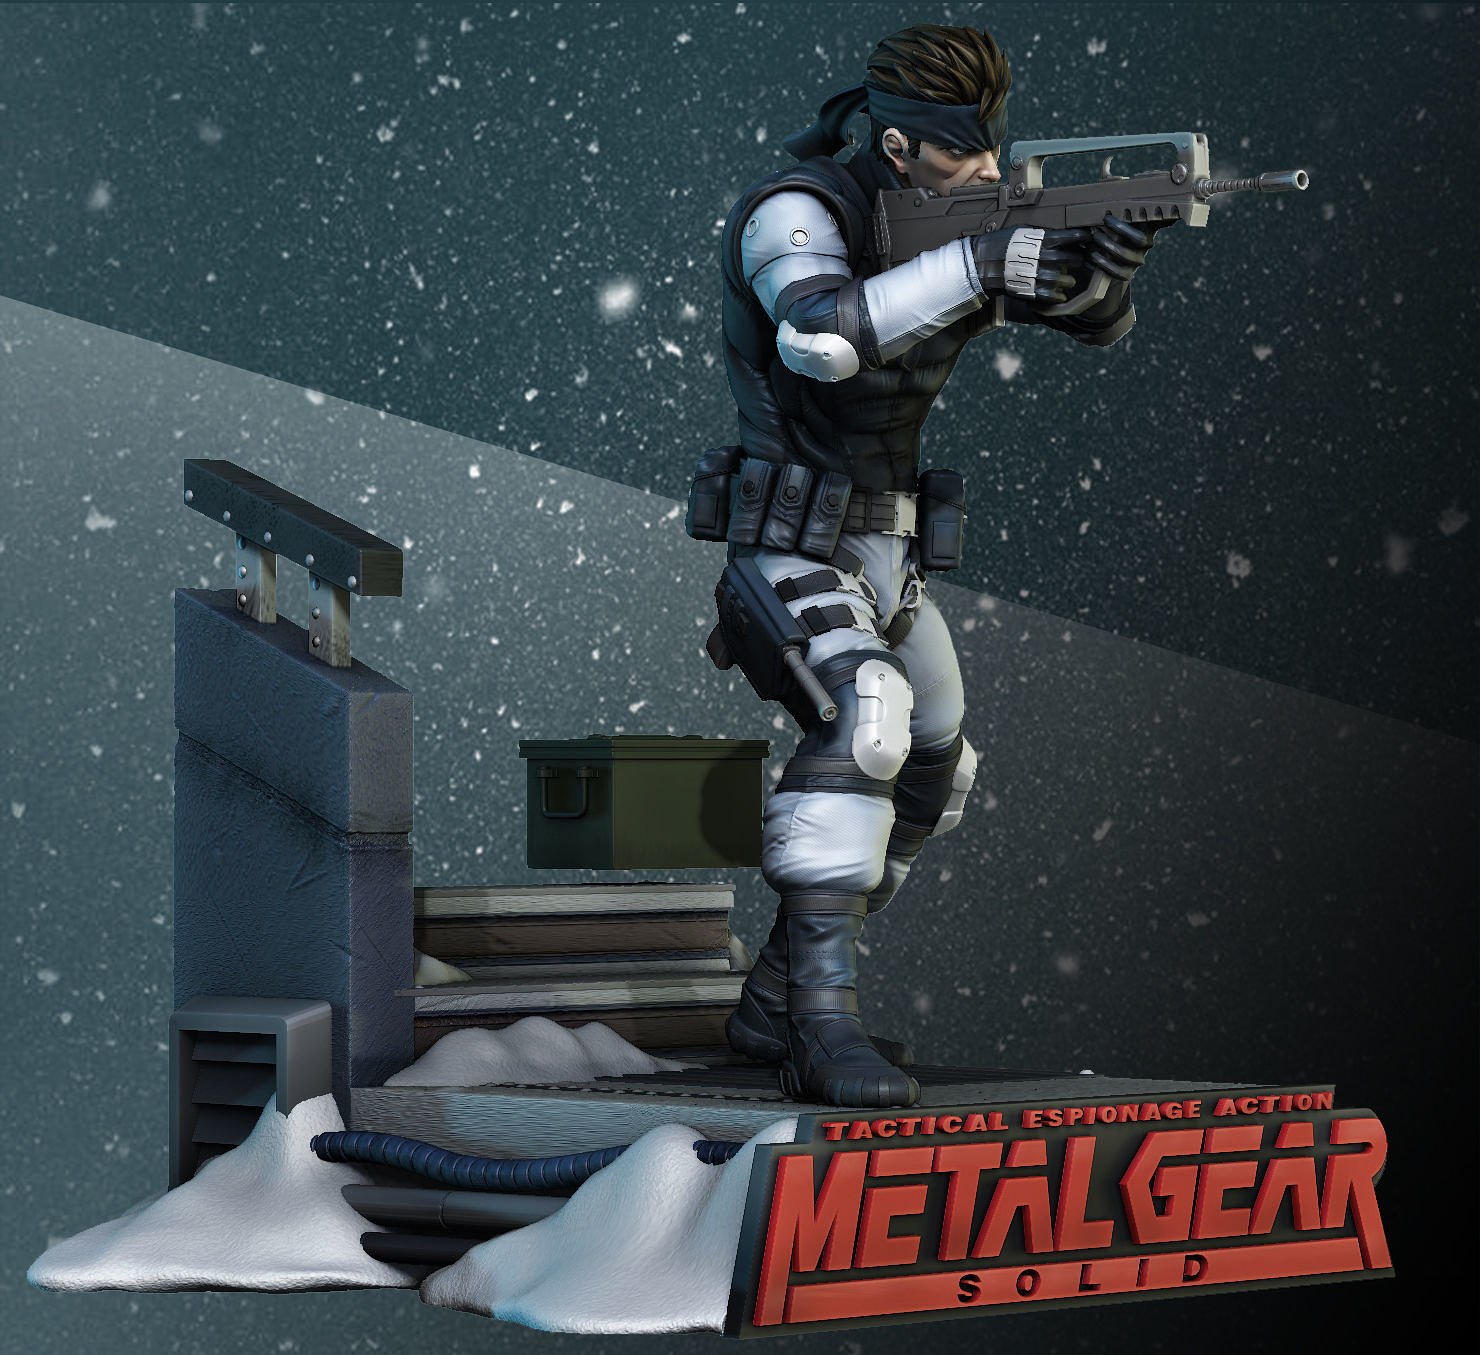 Solid Snake From Metal Gear Solid